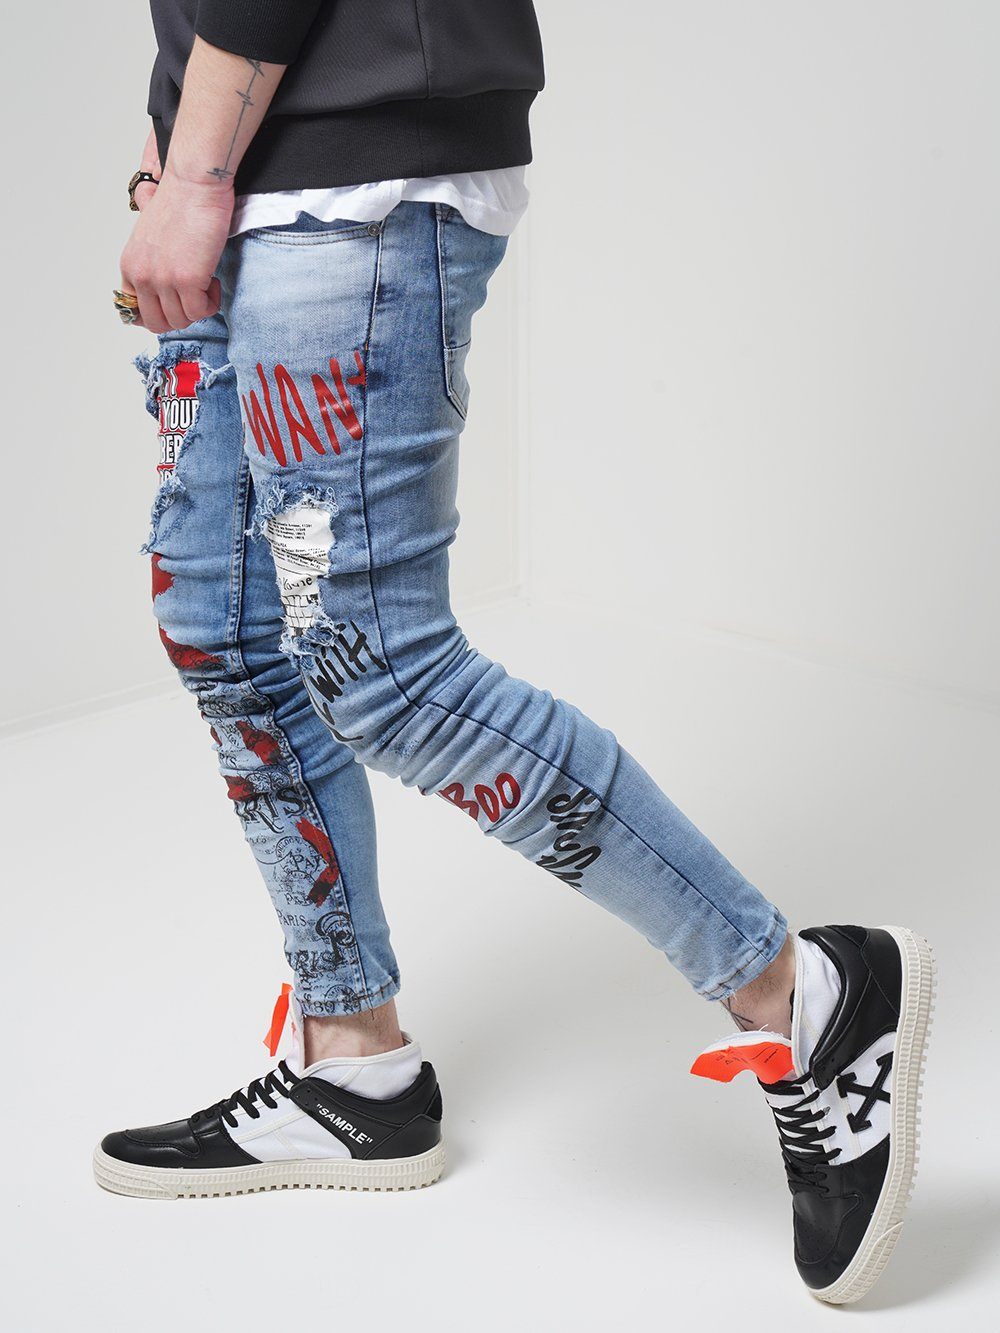 A man wearing a pair of BANKSY jeans and sneakers.